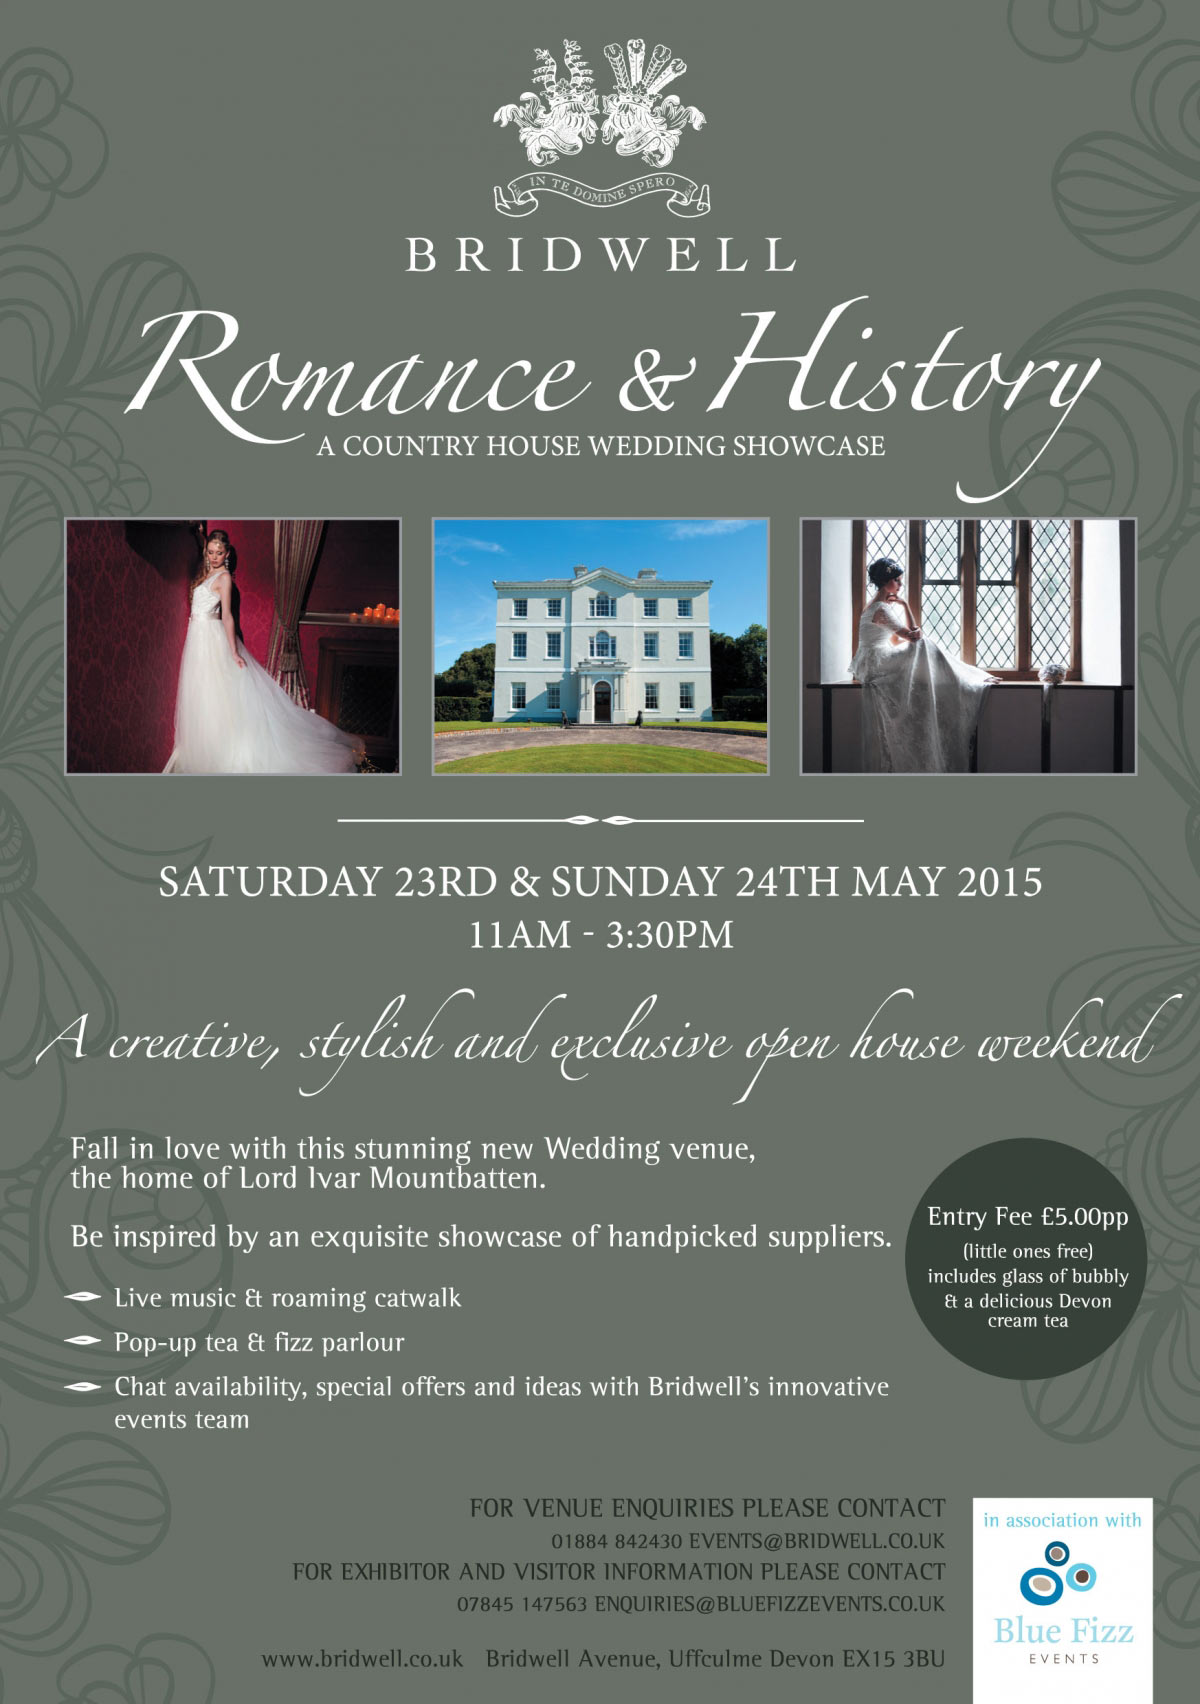 Romance & History - A Country House Wedding Showcase at Bridwell Park